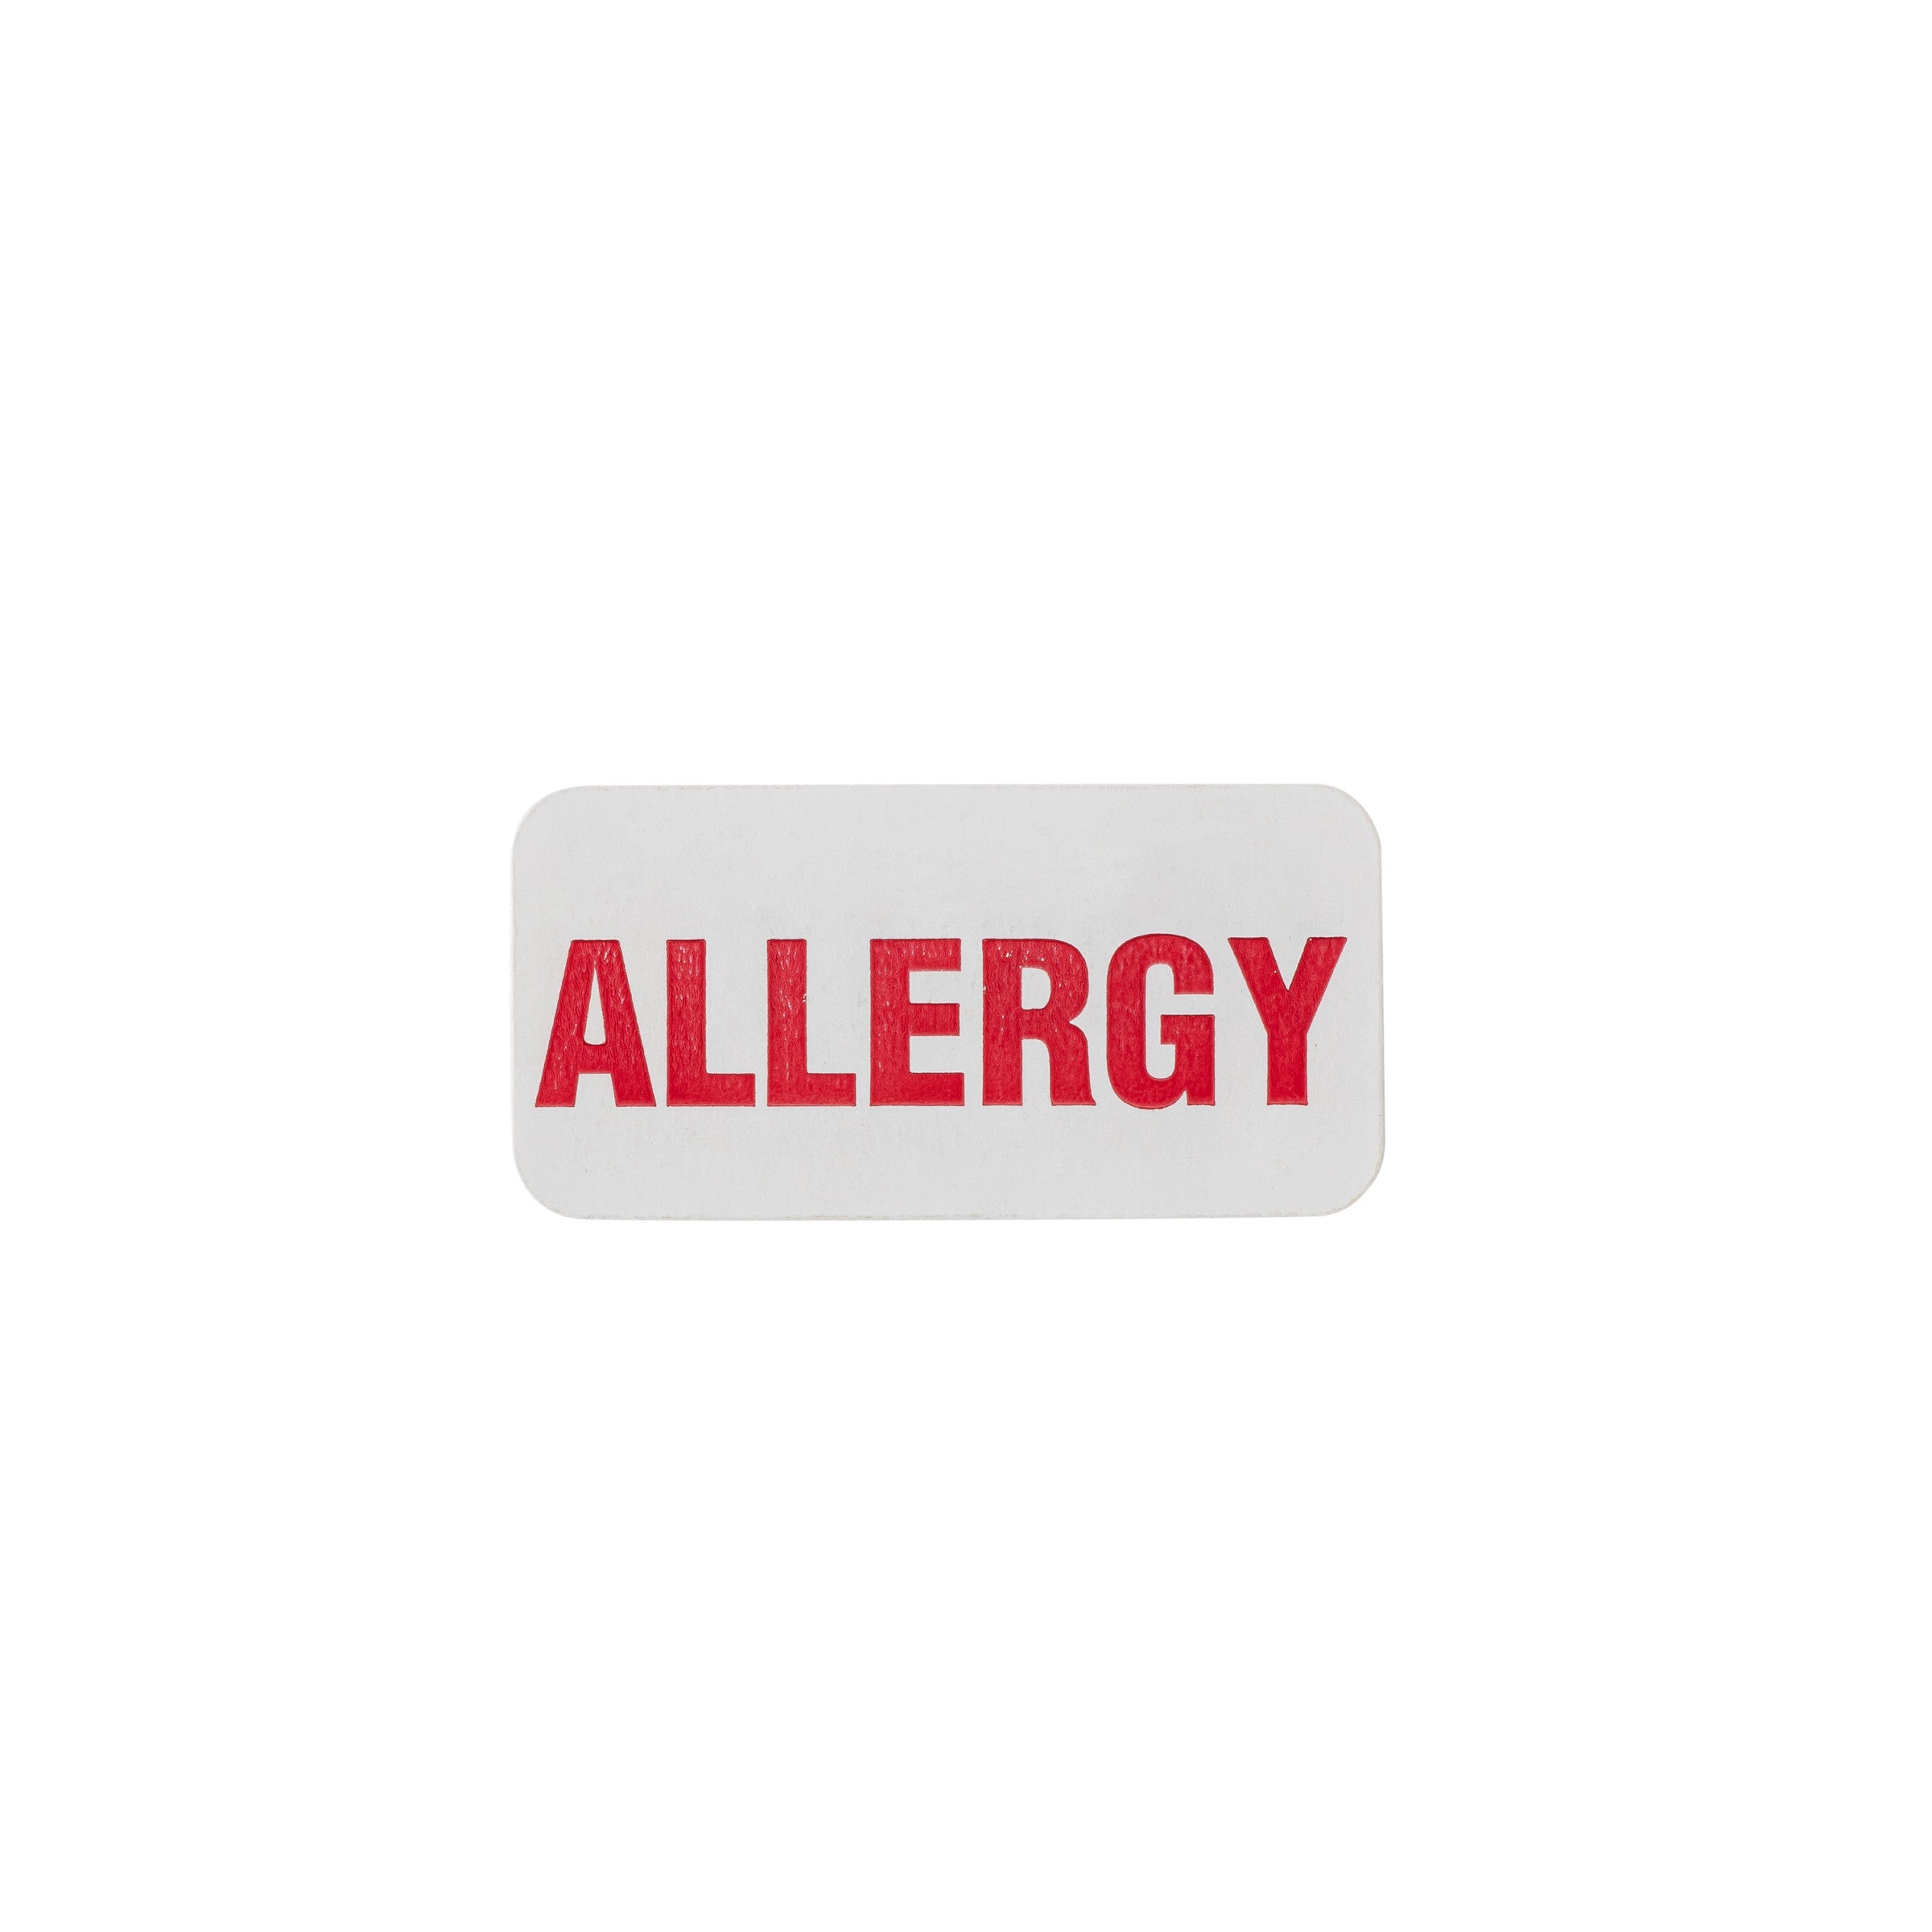 Allergy Alert and Instruction Label, White, W1.5" x H.75" (Roll of 100)